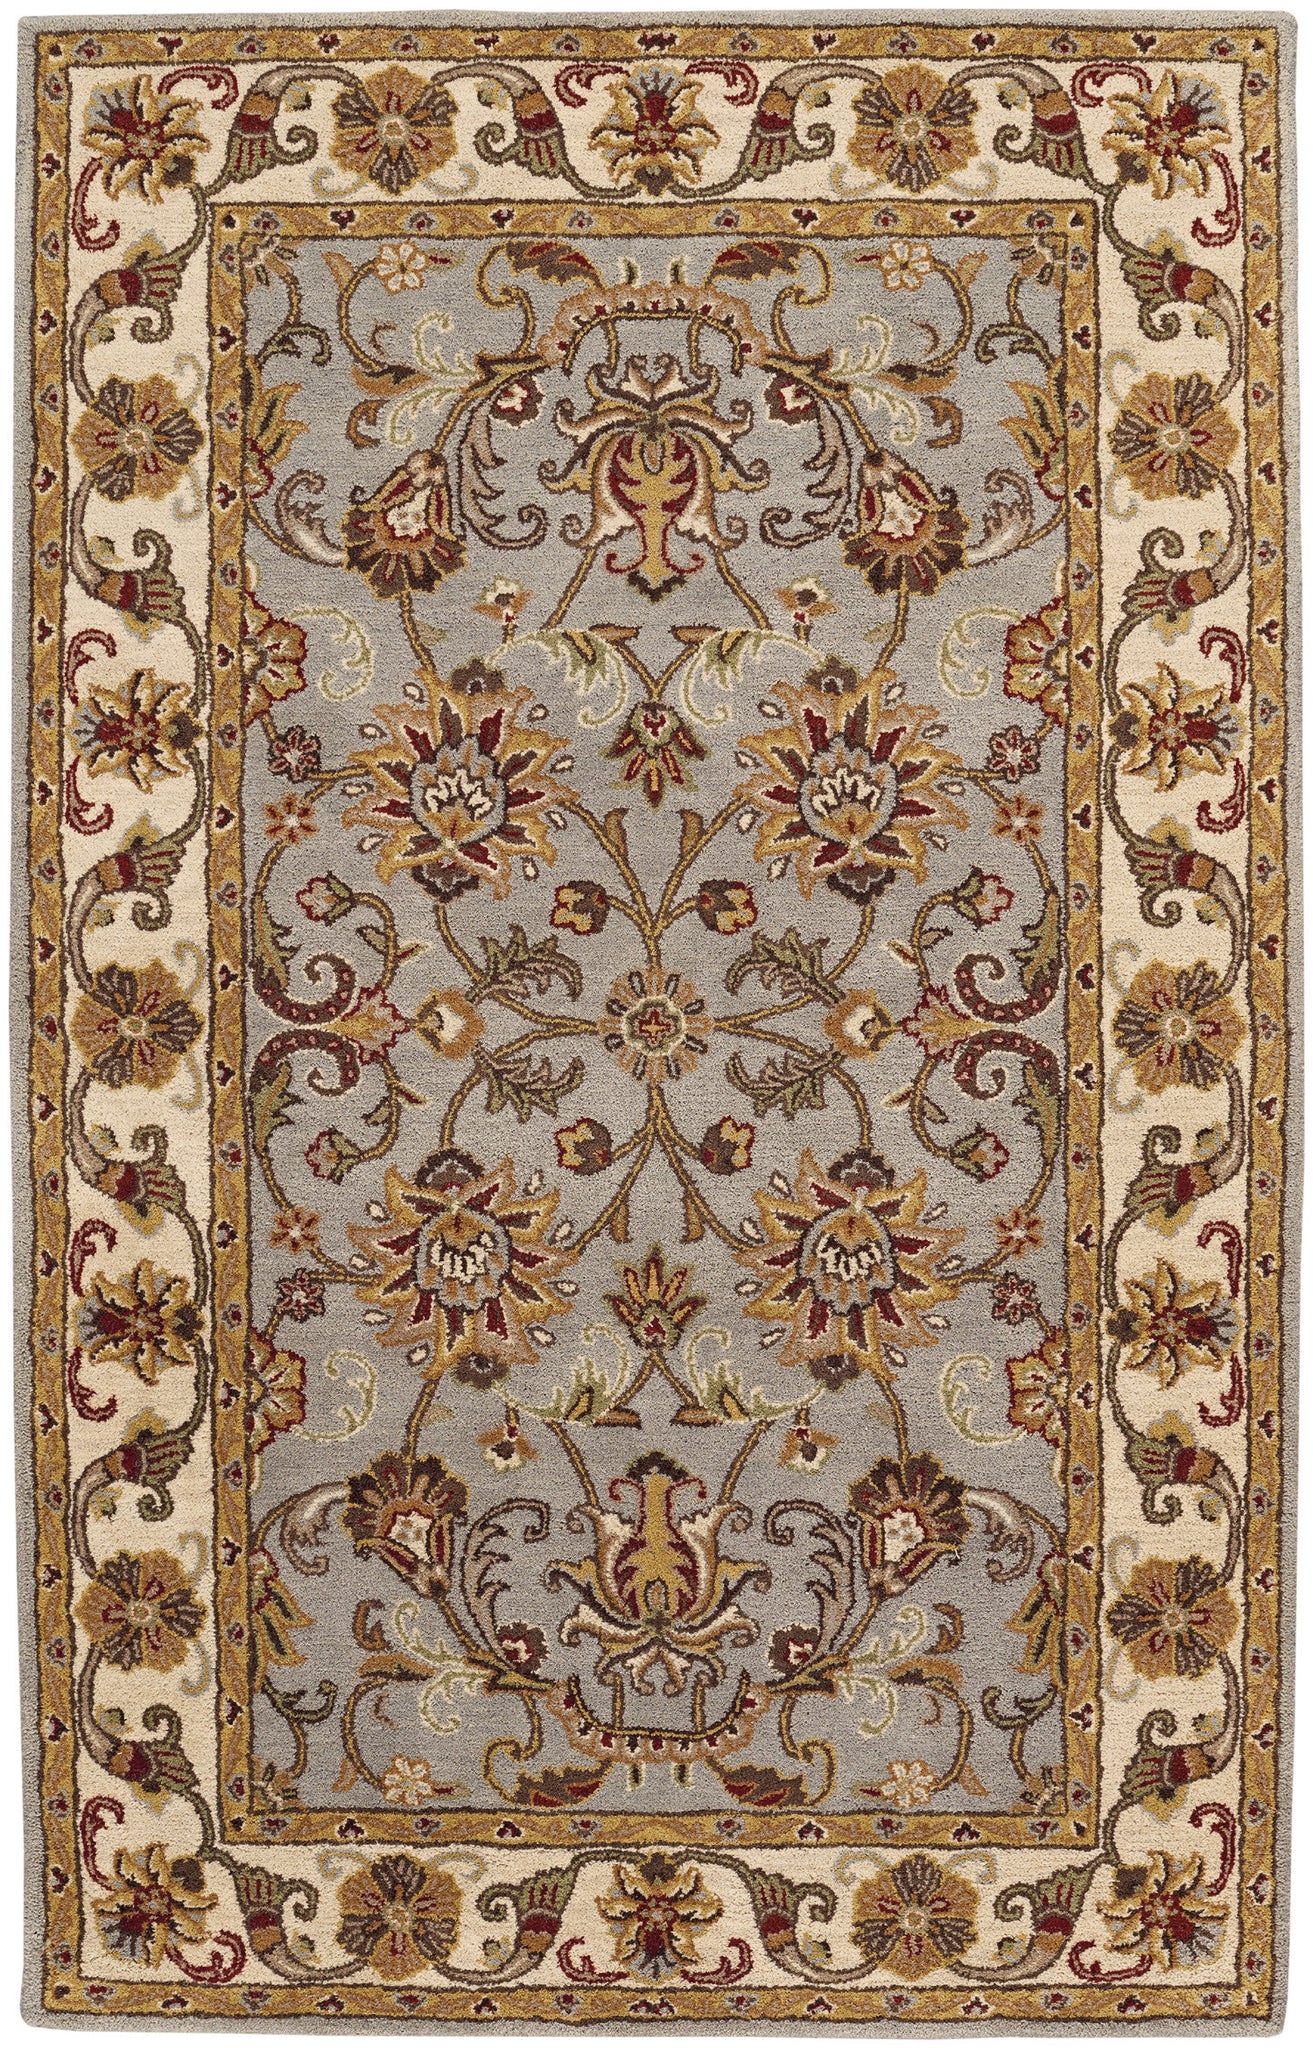 Capel Guilded 9205 Smoke 300 Area Rug main image